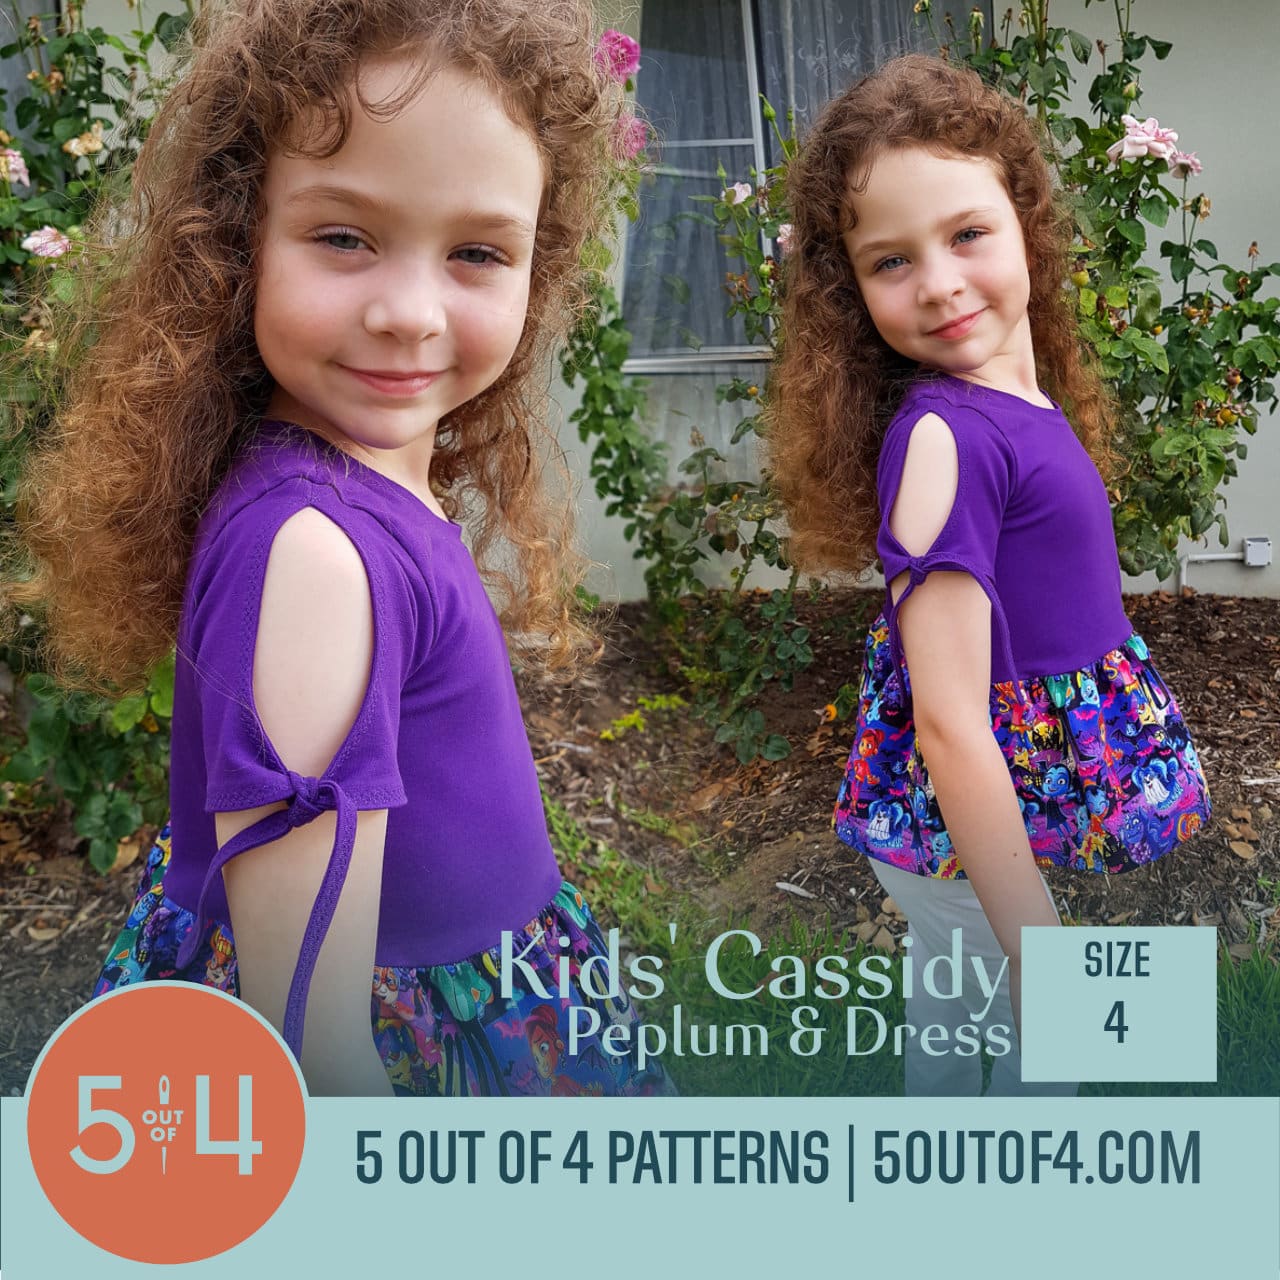 Kids' Cassidy Peplum and Dress - 5 out of 4 Patterns